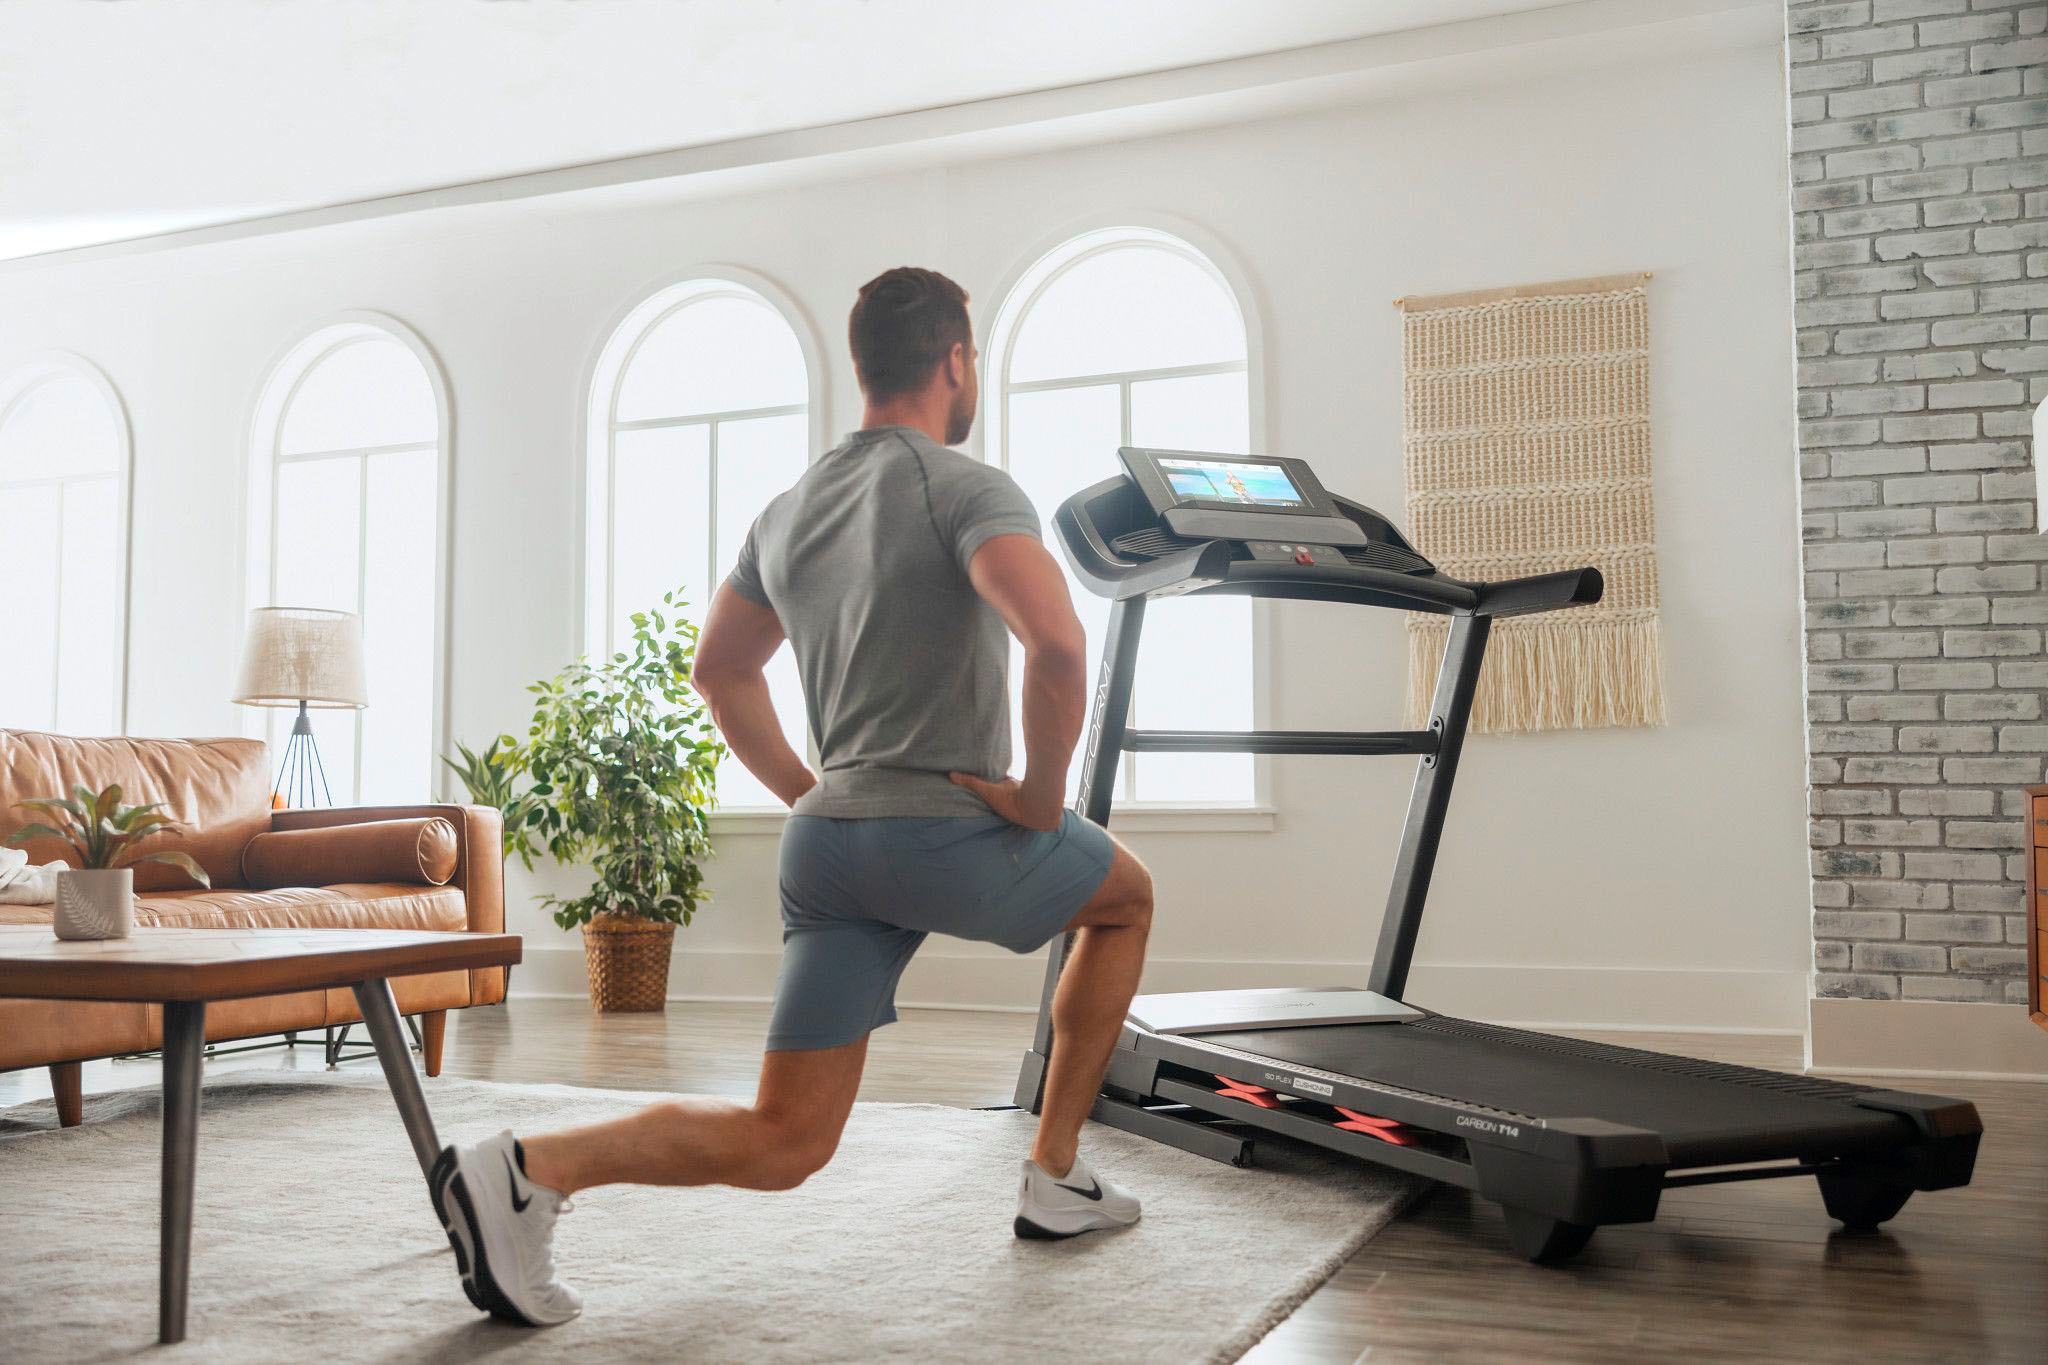 How To Warm Up On Treadmill